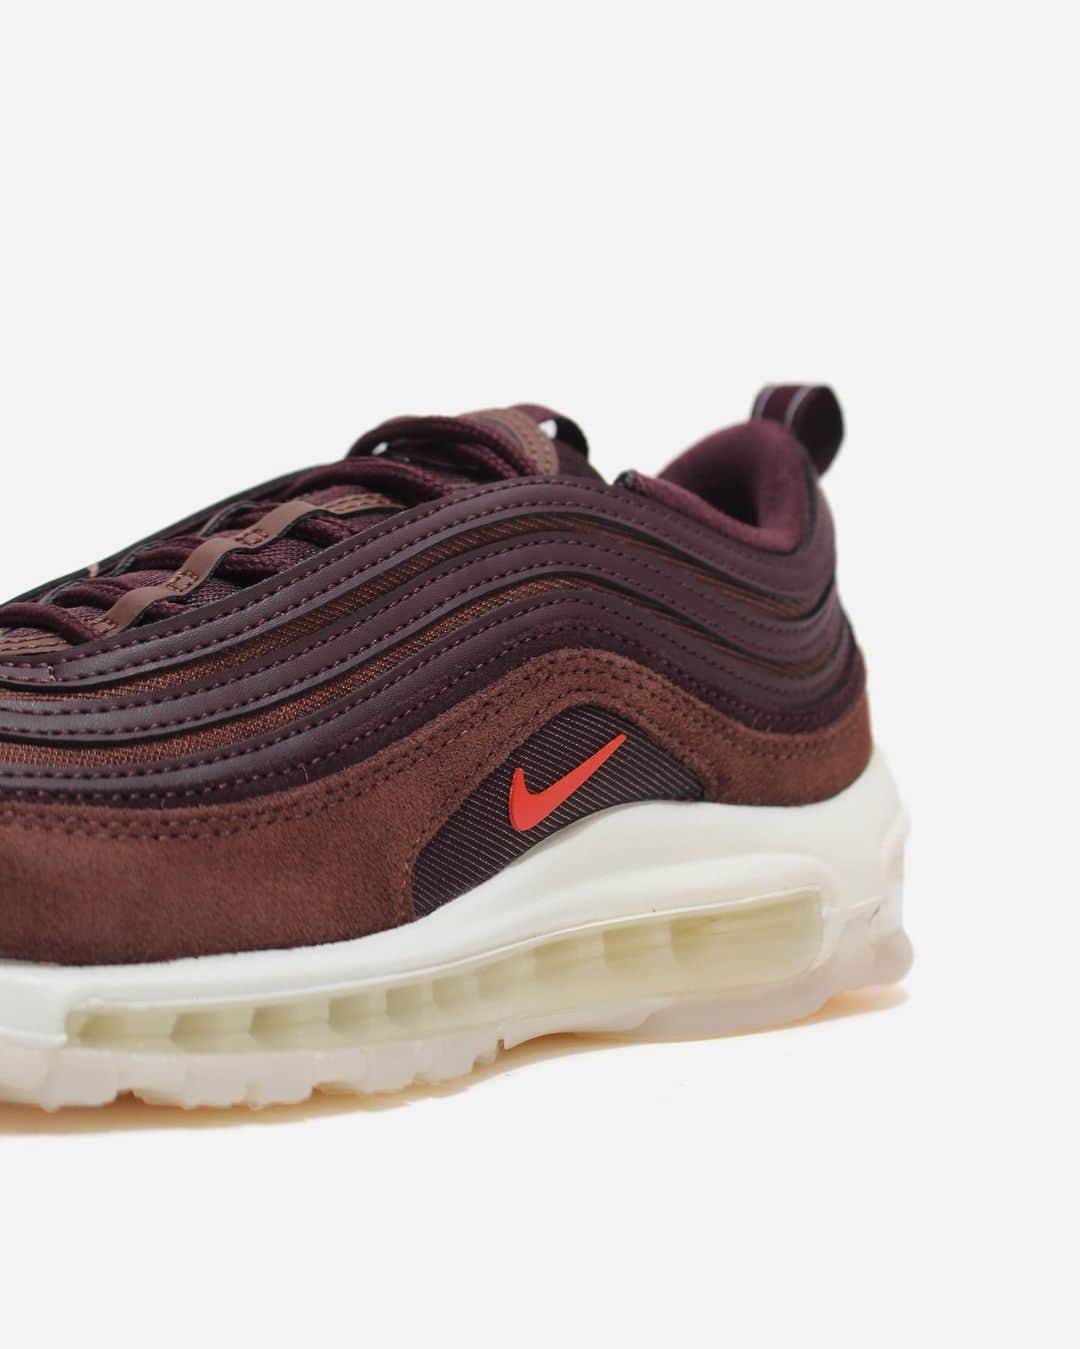 A+Sのインスタグラム：「2021. 2. 1 (mon) in store  ■NIKE WMNS AIR MAX 97 SE COLOR : AUNA BROWN SIZE : 22.5cm - 25.0cm PRICE : ¥19,000 (+TAX)  カフェカルチャーののんびりとした雰囲気からインスピレーションを得て作られたカフェラテパック。豊かで温かみのあるラテがカラーベースになったAIR MAX 97です。  A cafe latte pack inspired by the laid-back atmosphere of cafe culture. The AIR MAX 97 is a color-based color-based latte with a rich and warm atmosphere.   #a_and_s #NIKE #NIKEAIRMAX #NIKEAIRMAX97 #NIKECAFFELATTEPACK」